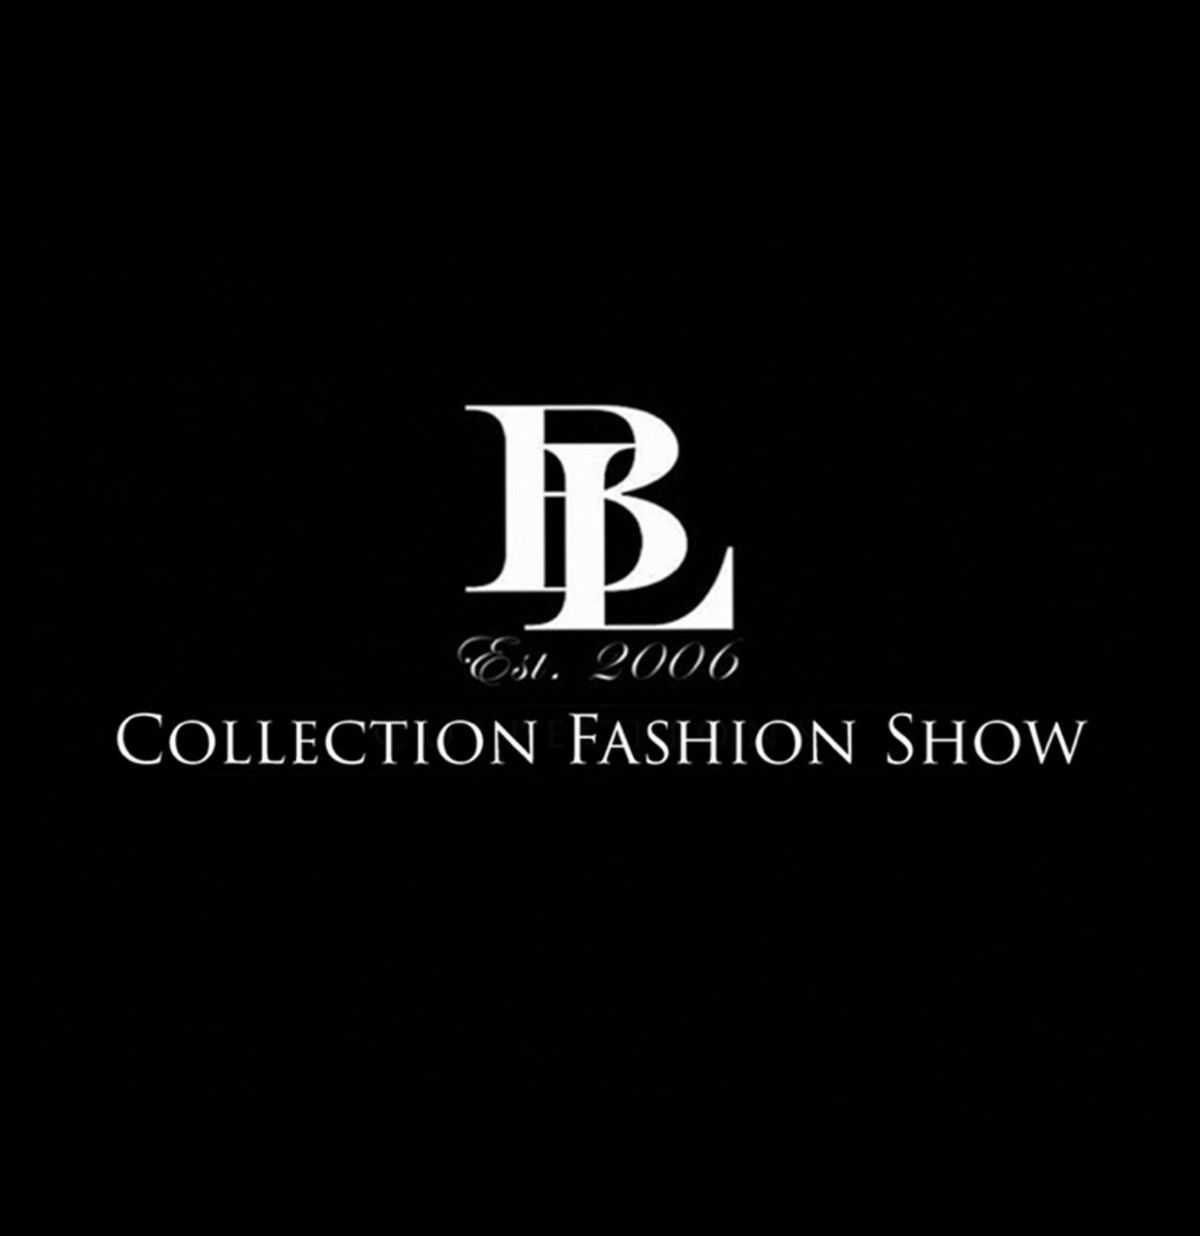 Collections Fashion Show